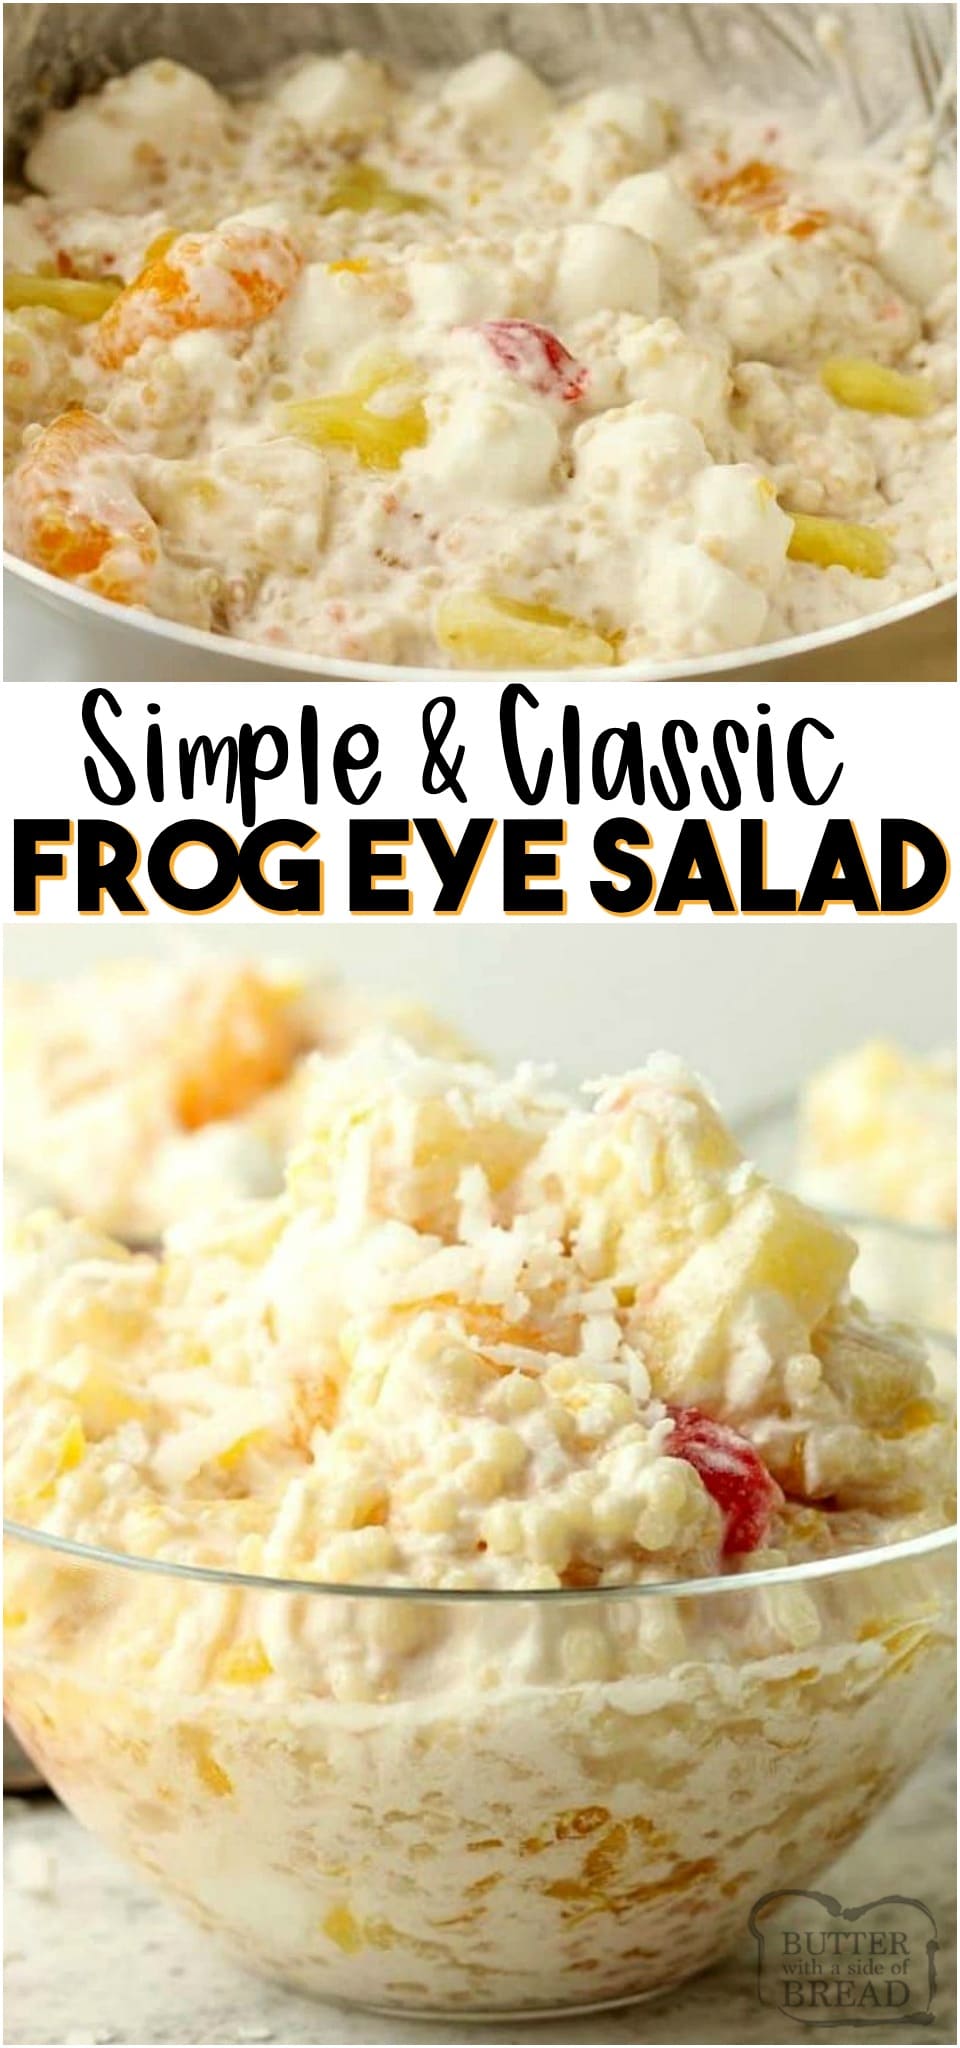 Frog Eye Salad is a classic pot luck recipe. This delicious sweet fruit salad has tiny pasta, mandarin oranges, pineapple, whipped topping, marshmallows, coconut and sweet cherries. #salad #fruit #frogeye #easysalad #fruitsalad #holiday #recipe from BUTTER WITH A SIDE OF BREAD